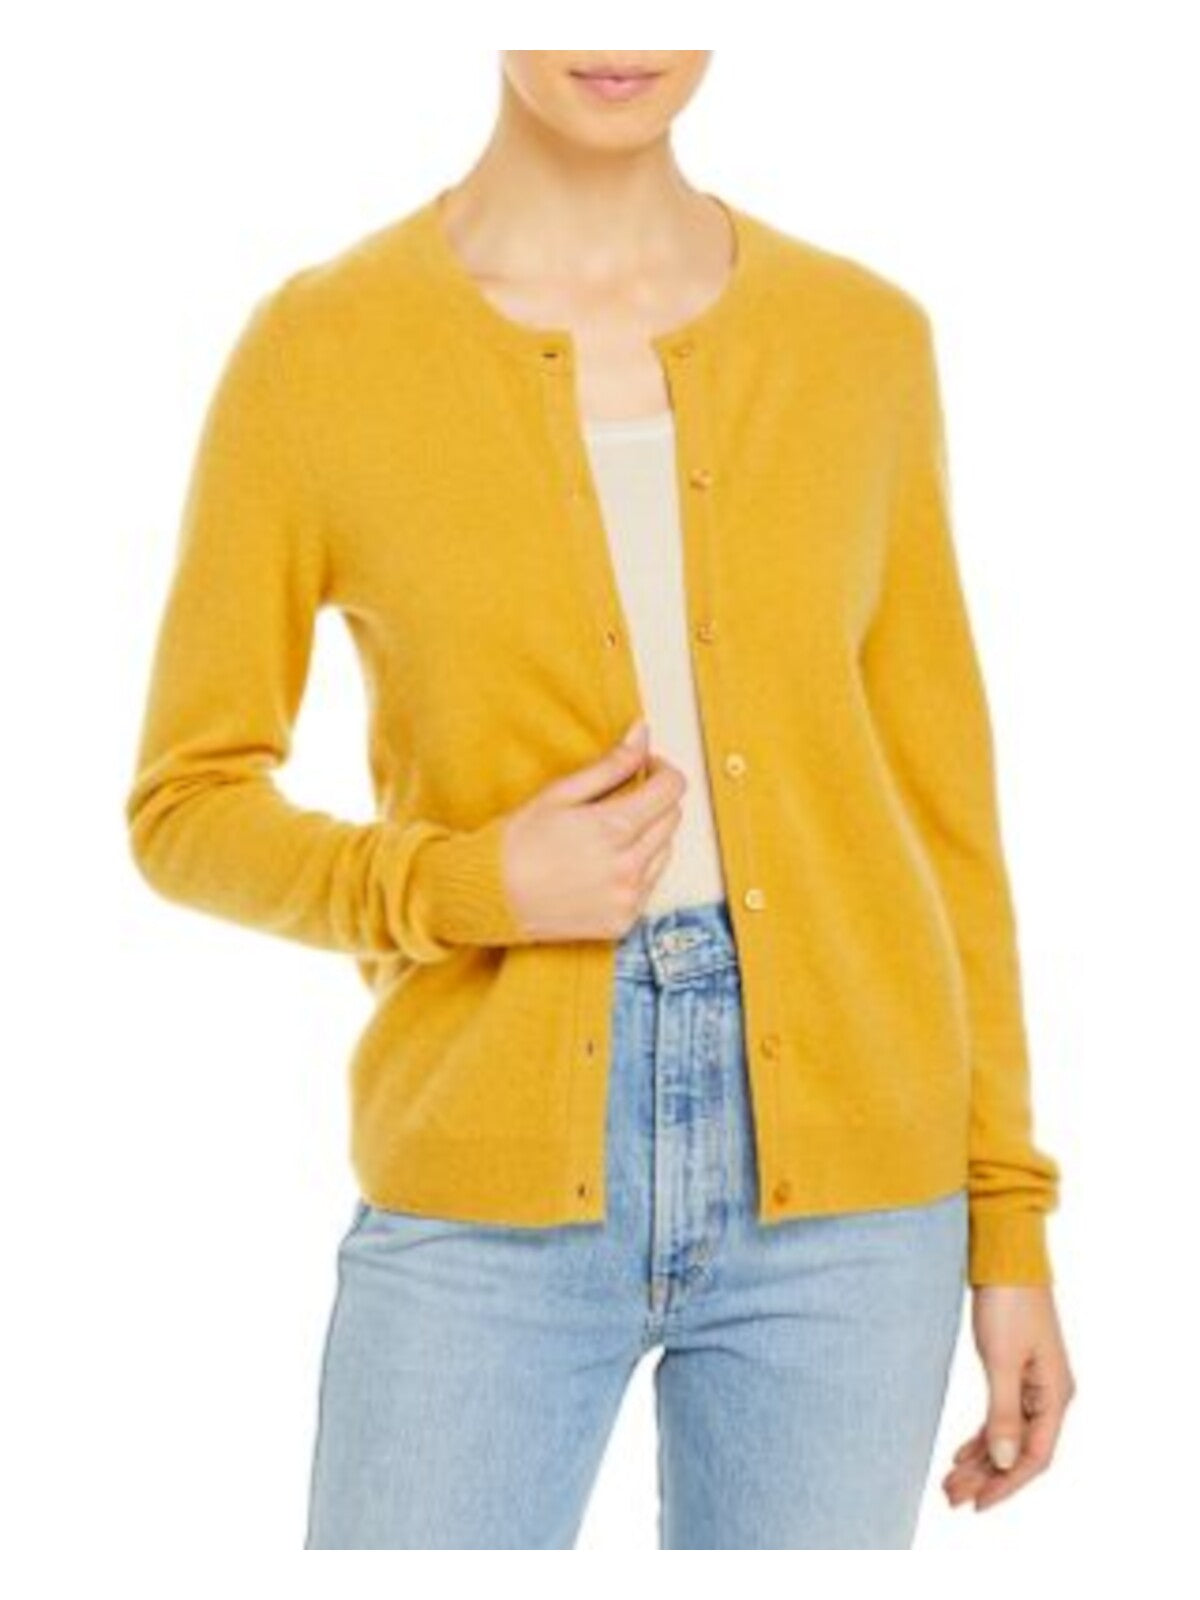 Designer Brand Womens Yellow Cashmere Long Sleeve Crew Neck Wear To Work Button Up Sweater XS